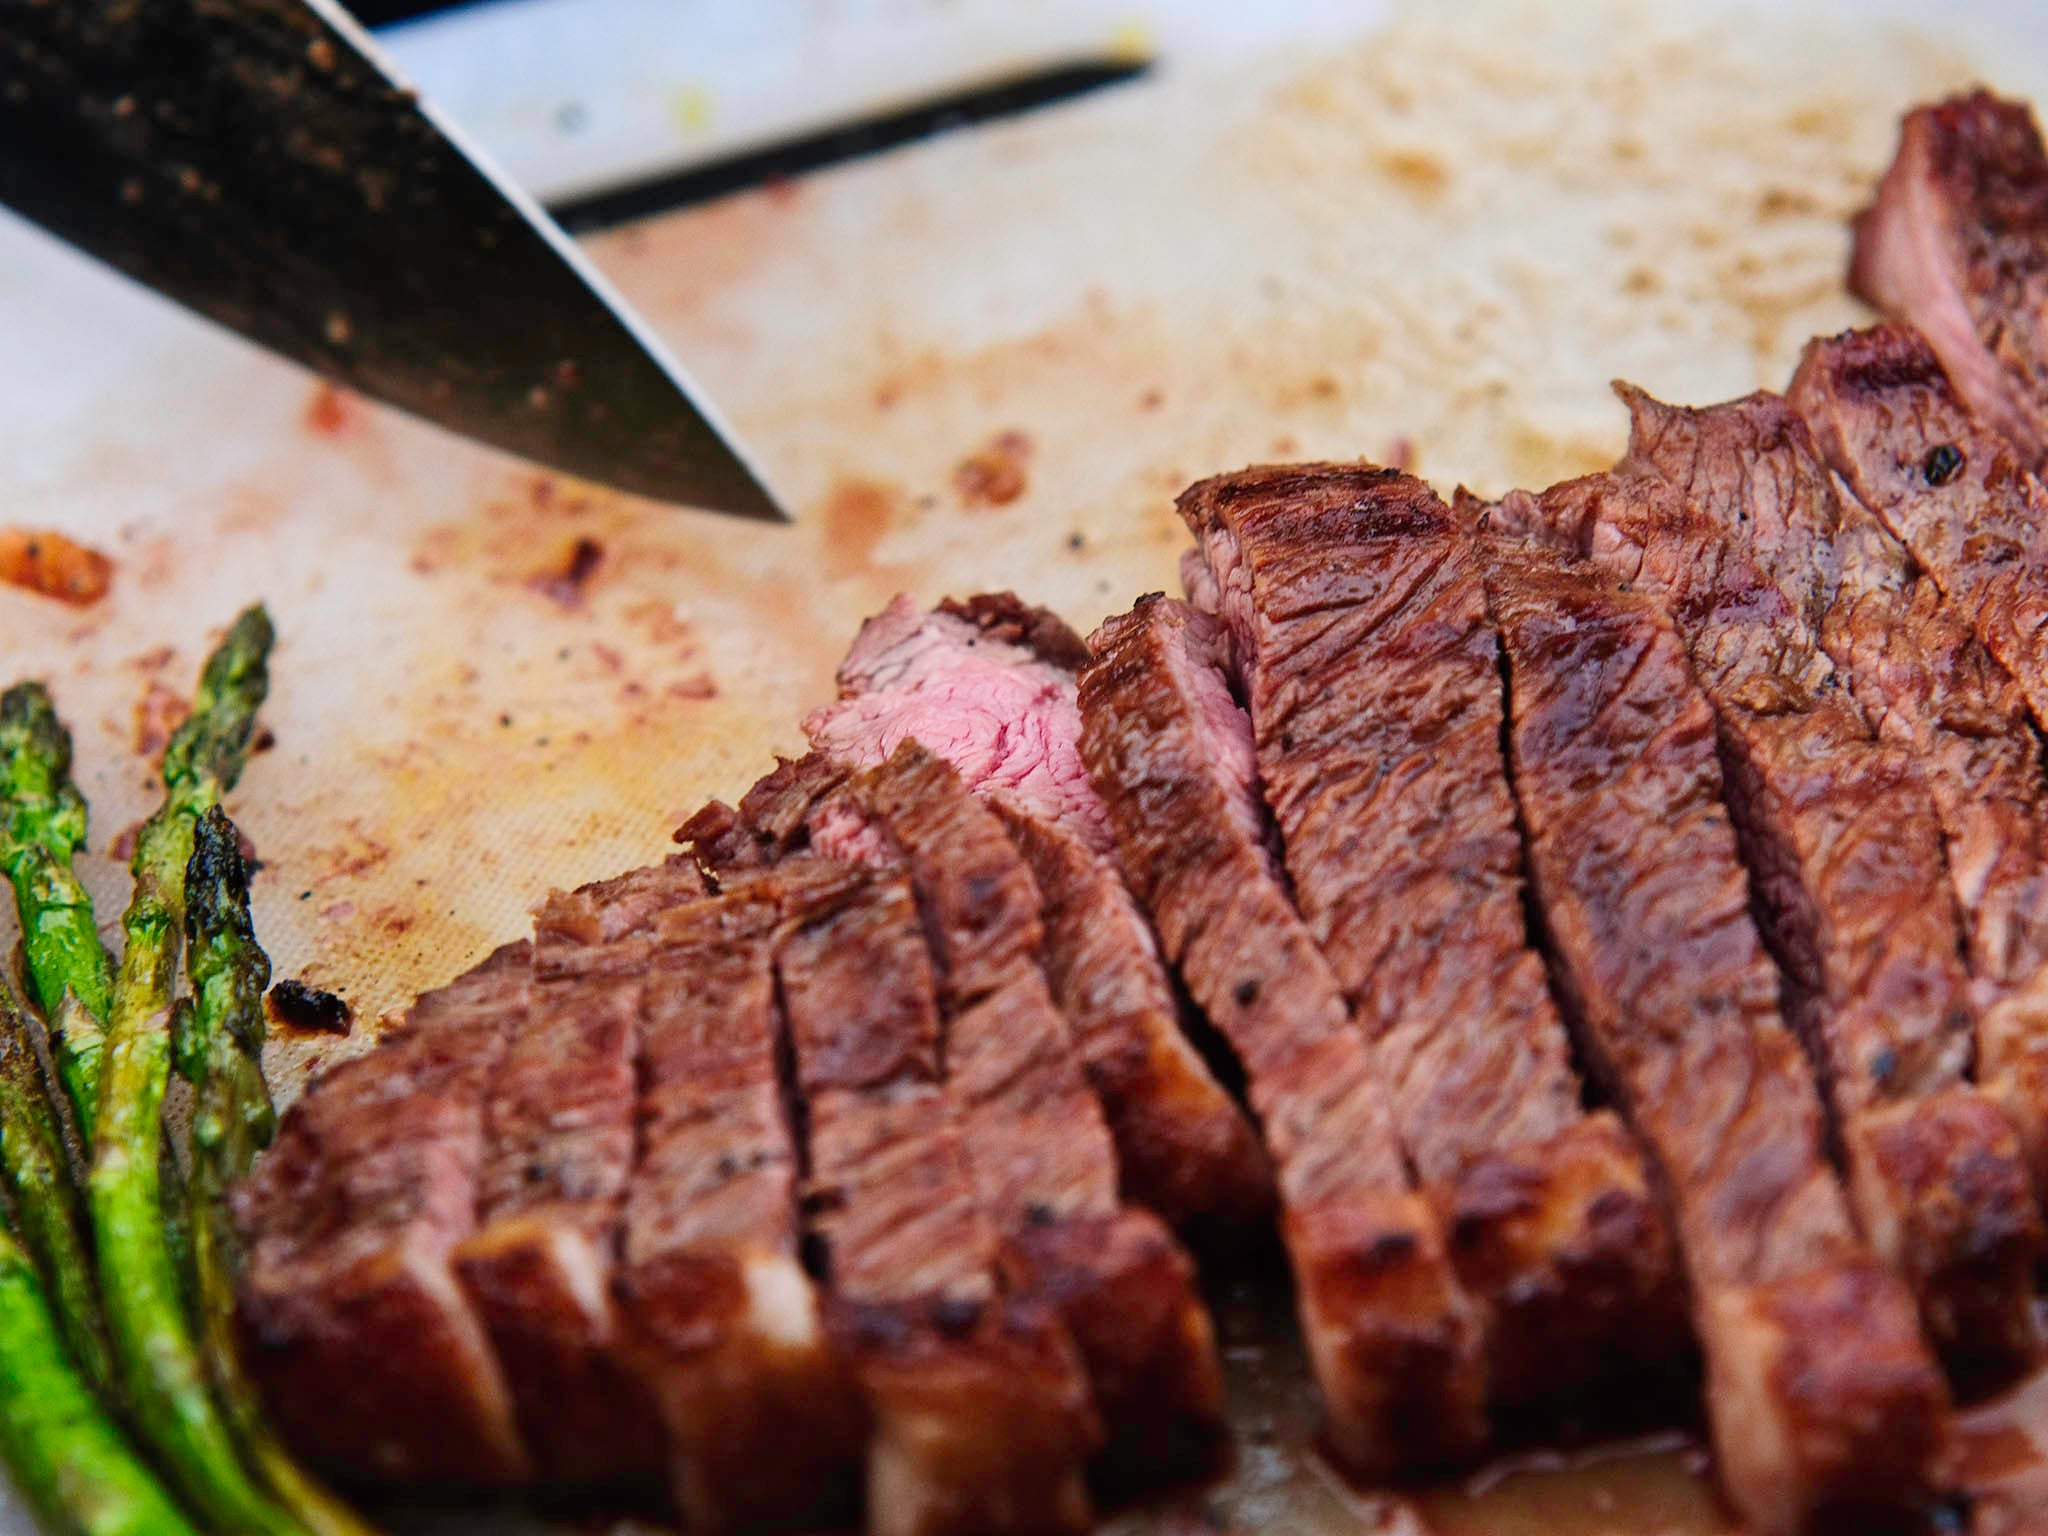 As the top of the sirloin seak, picanha is the prime cut and best served barbecued (Michael Swan)